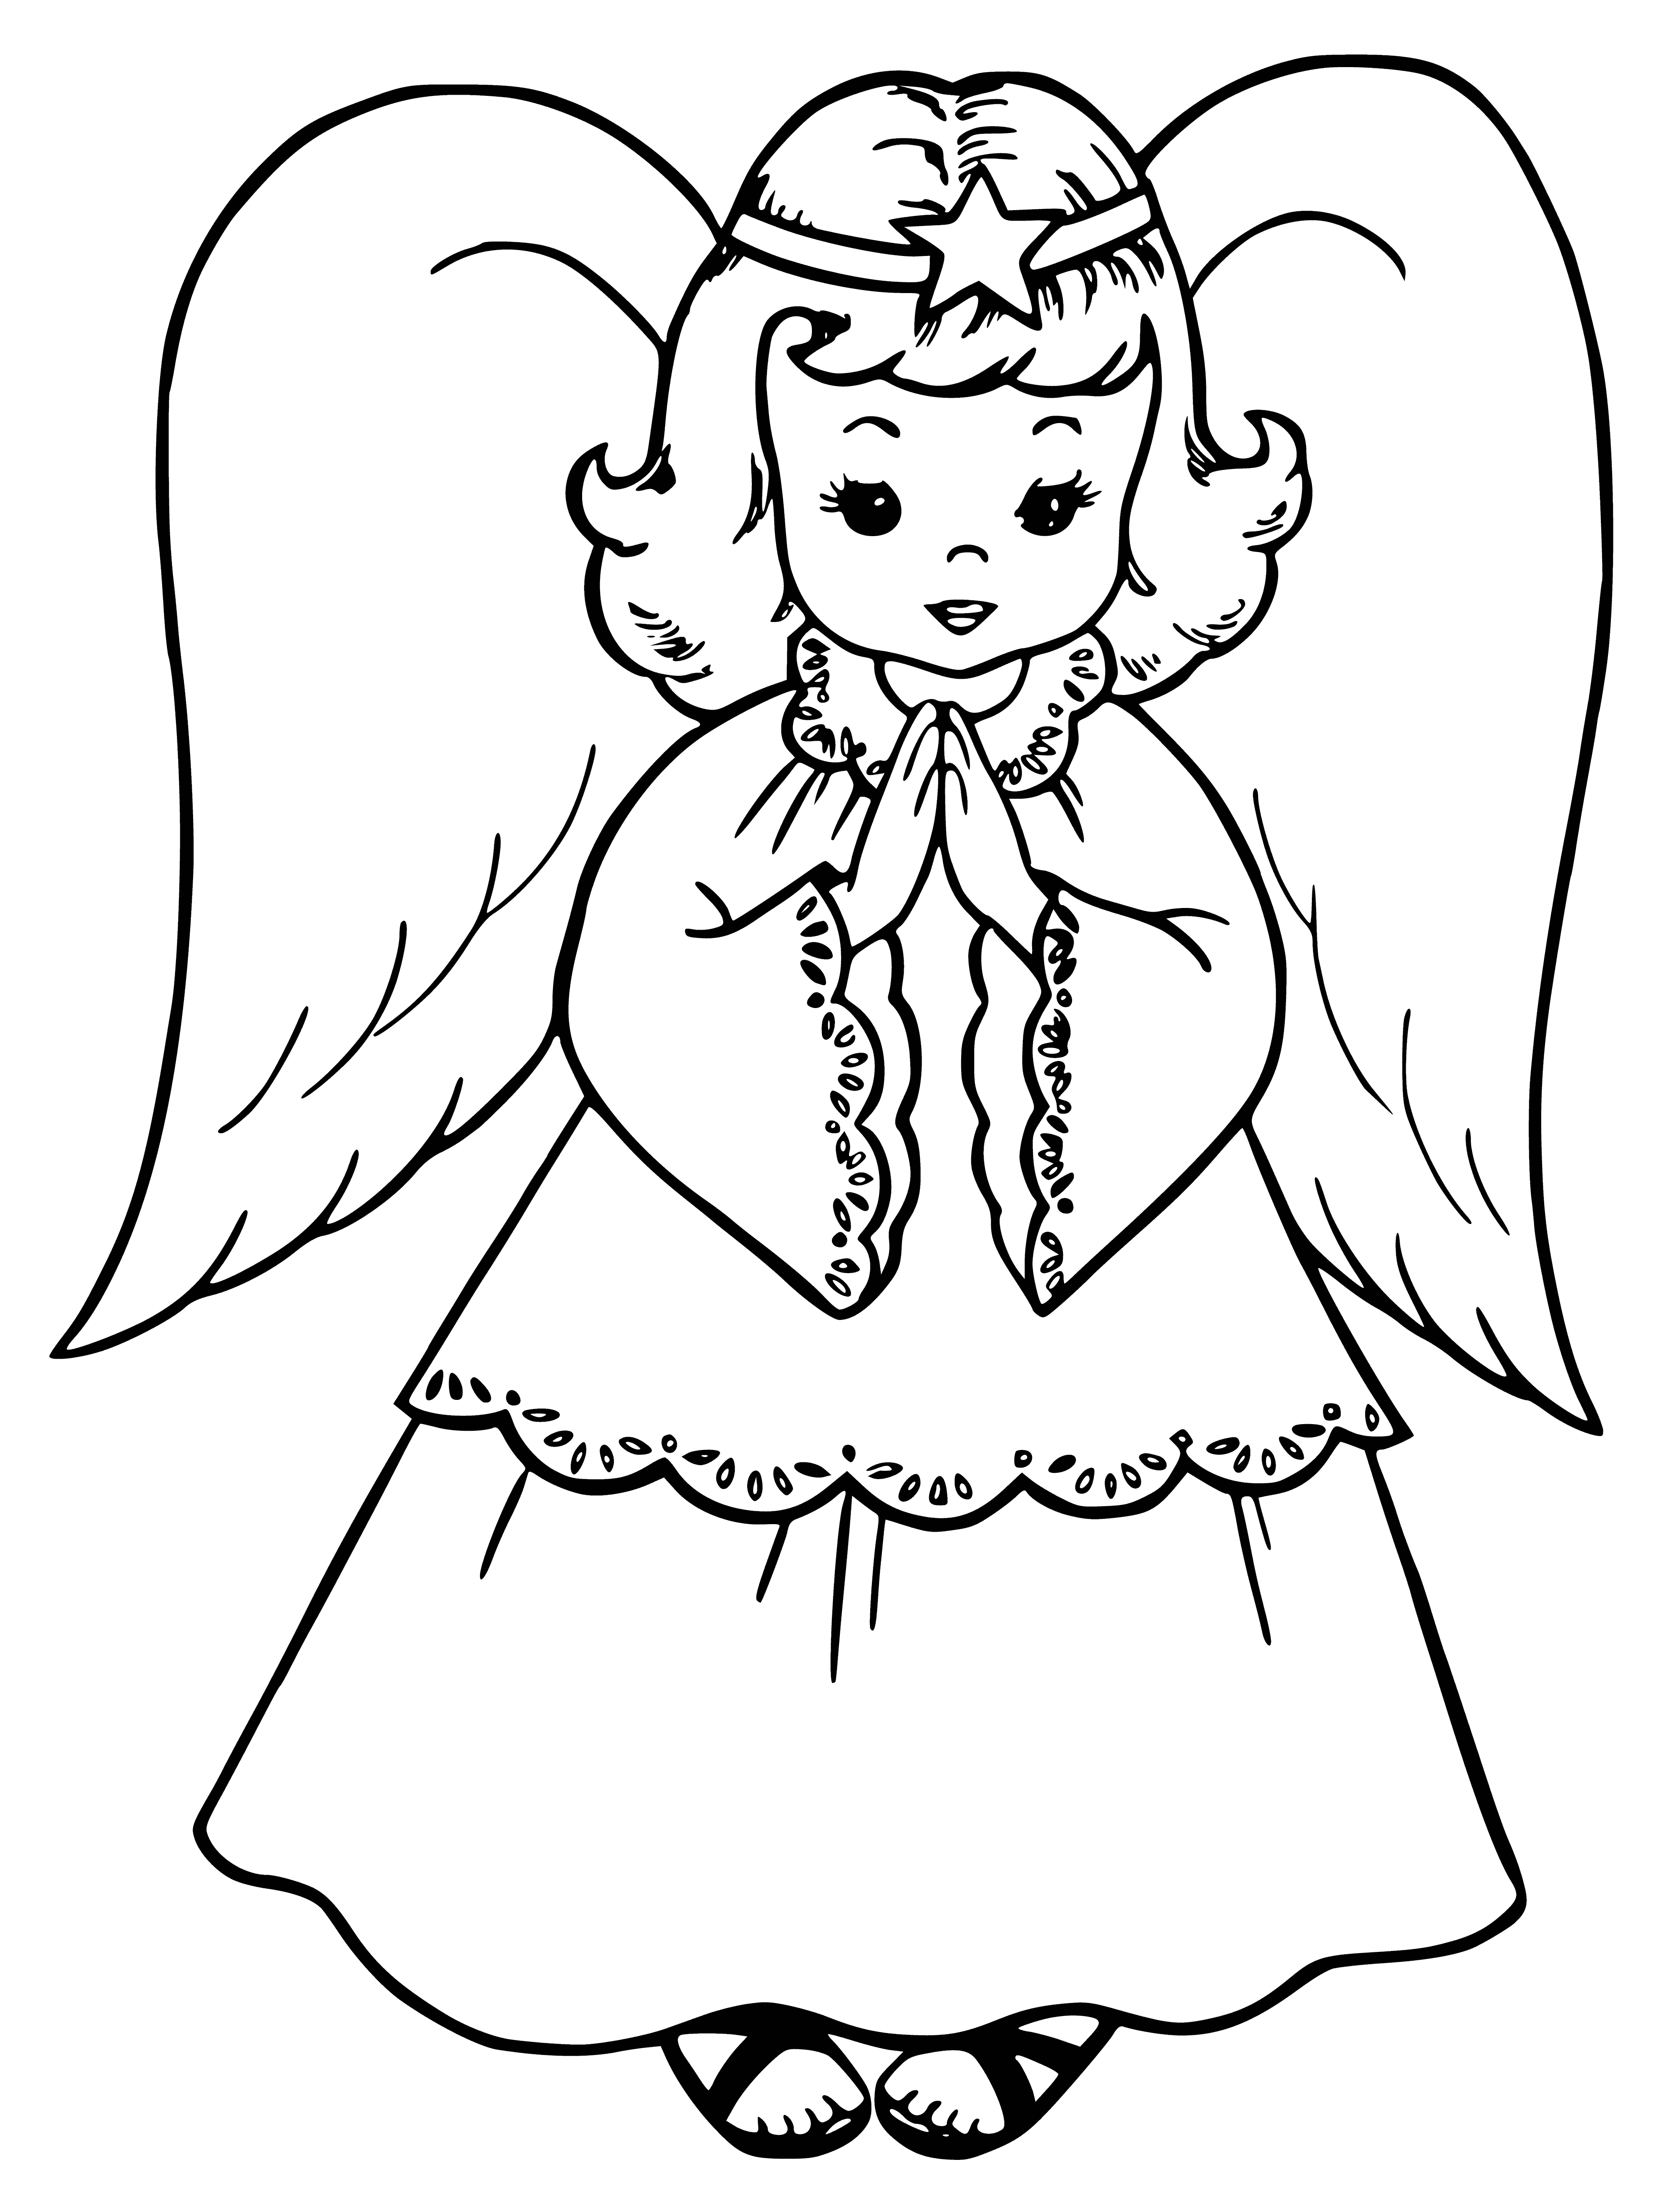 Girl in coloring page wears white dress, angel wings, halo, holds white feather.